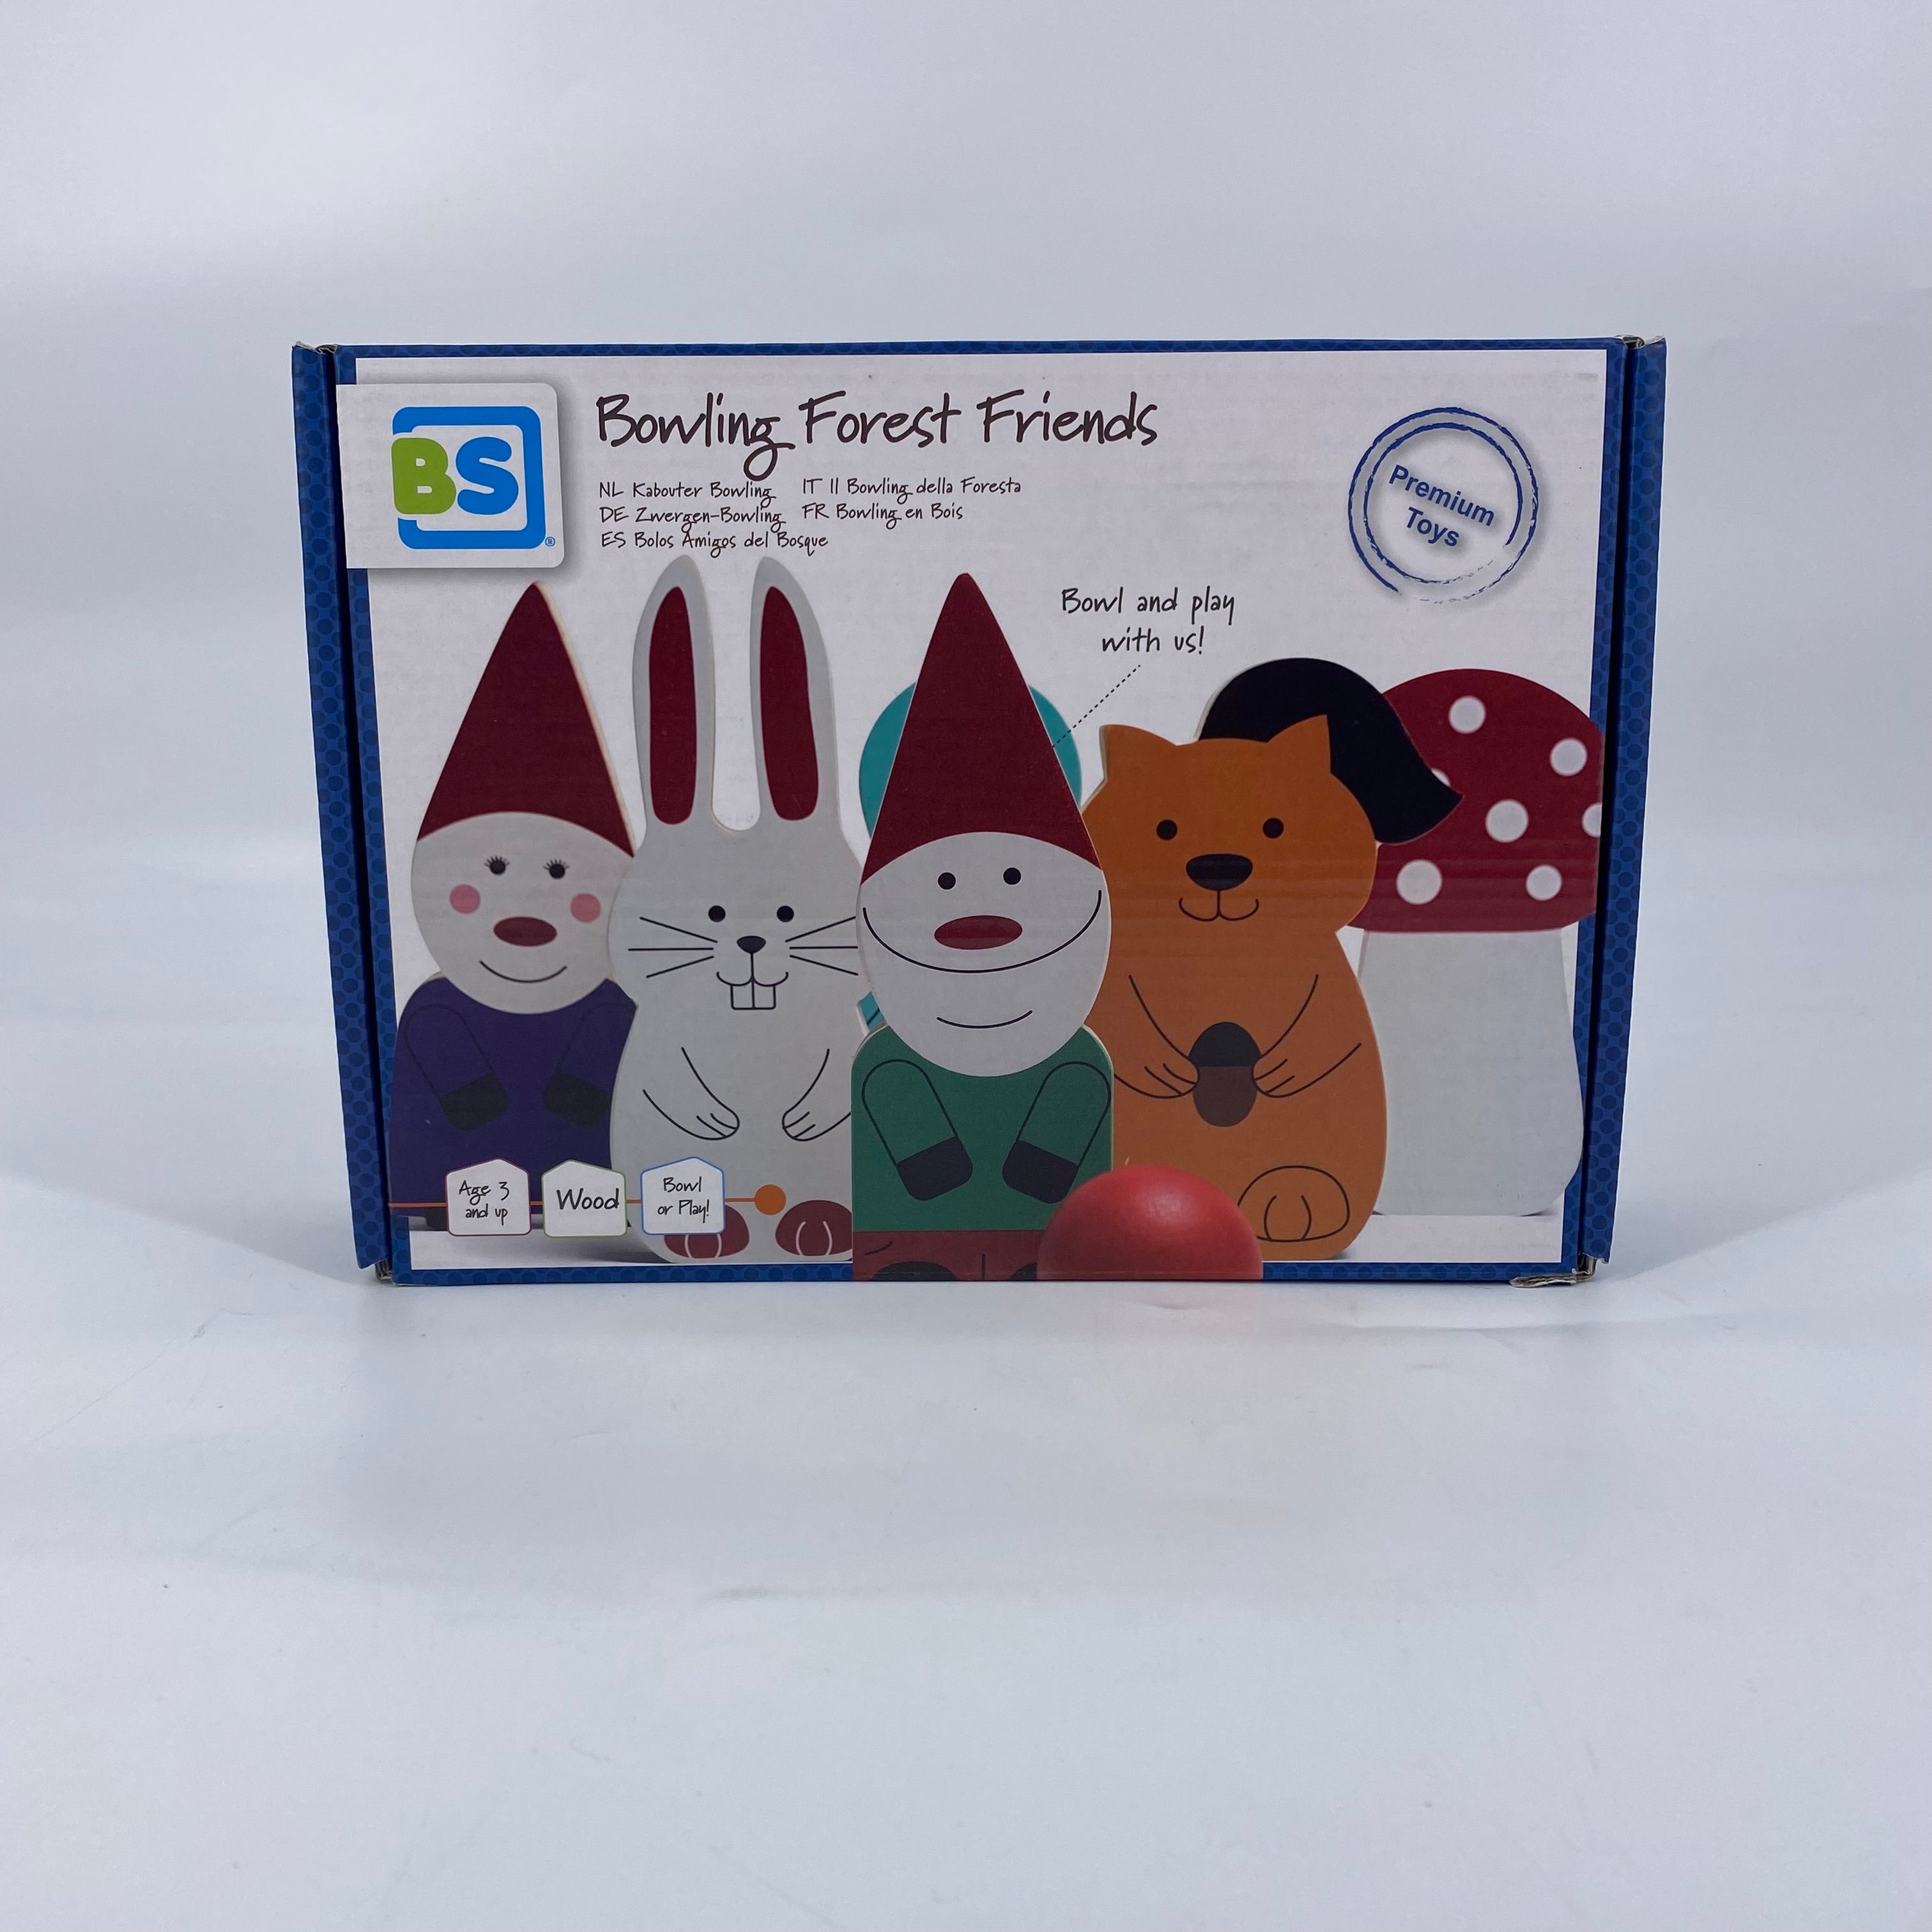 Bowling forest friends